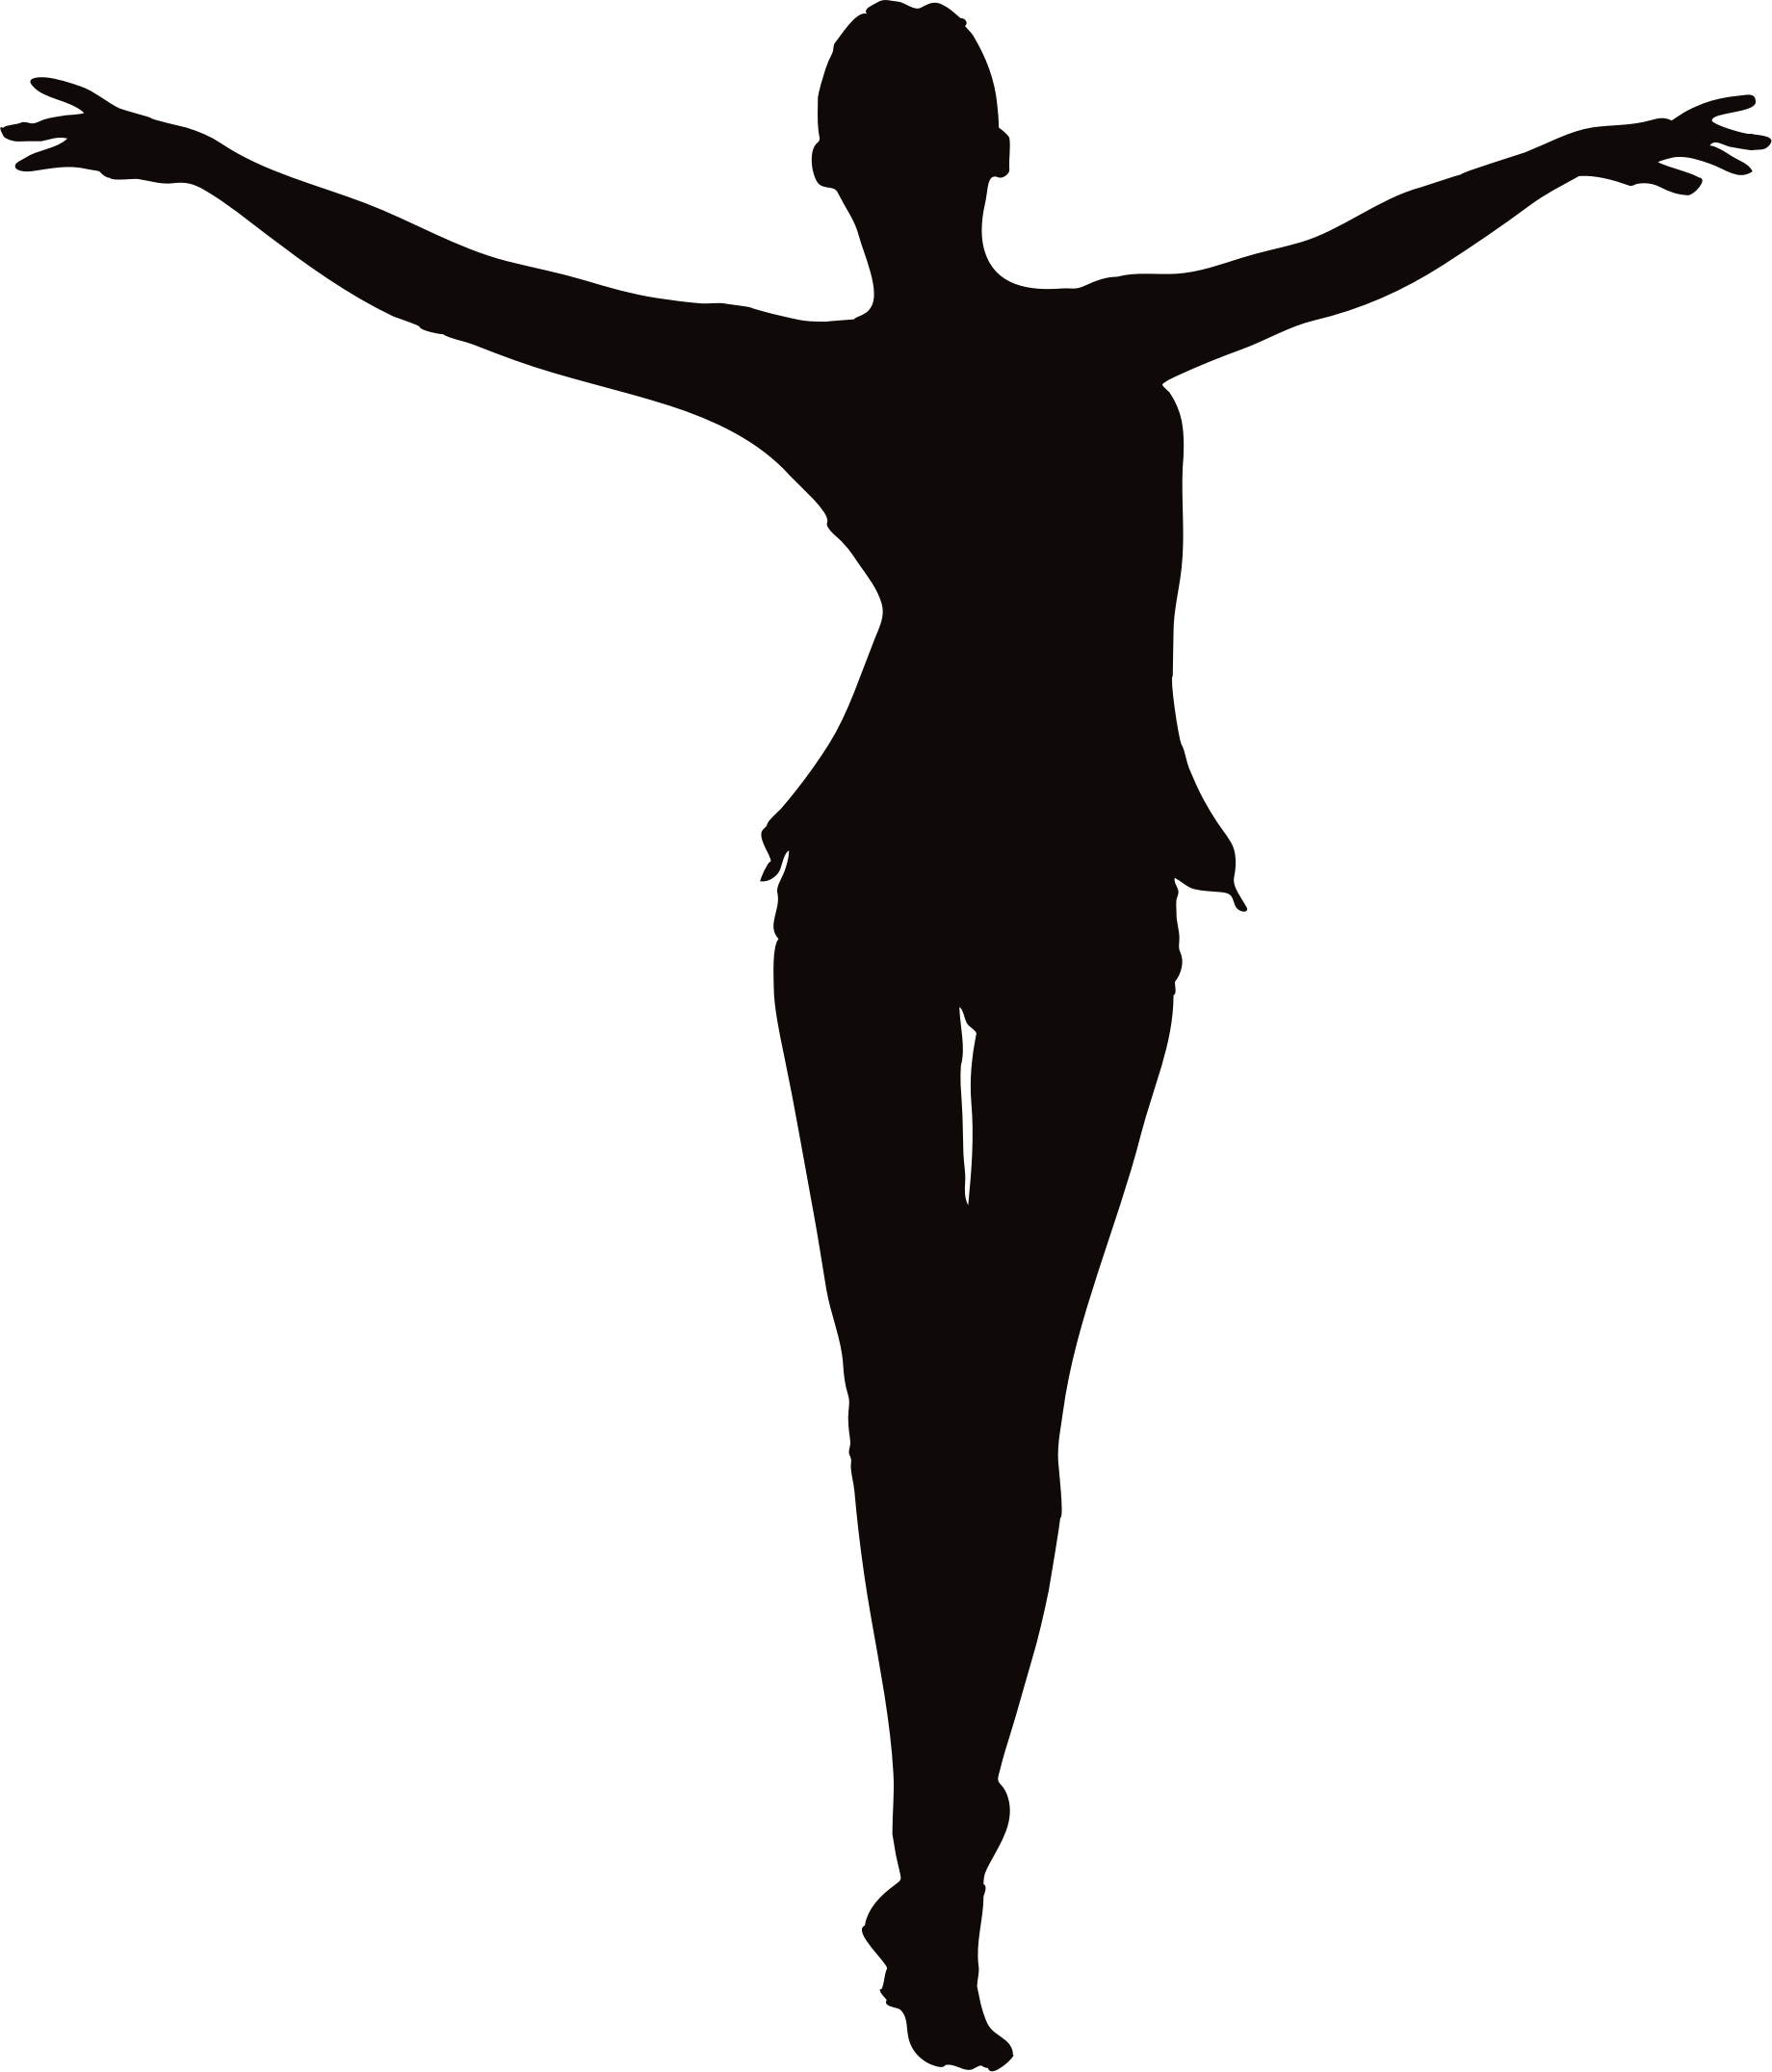 Female figure arms up